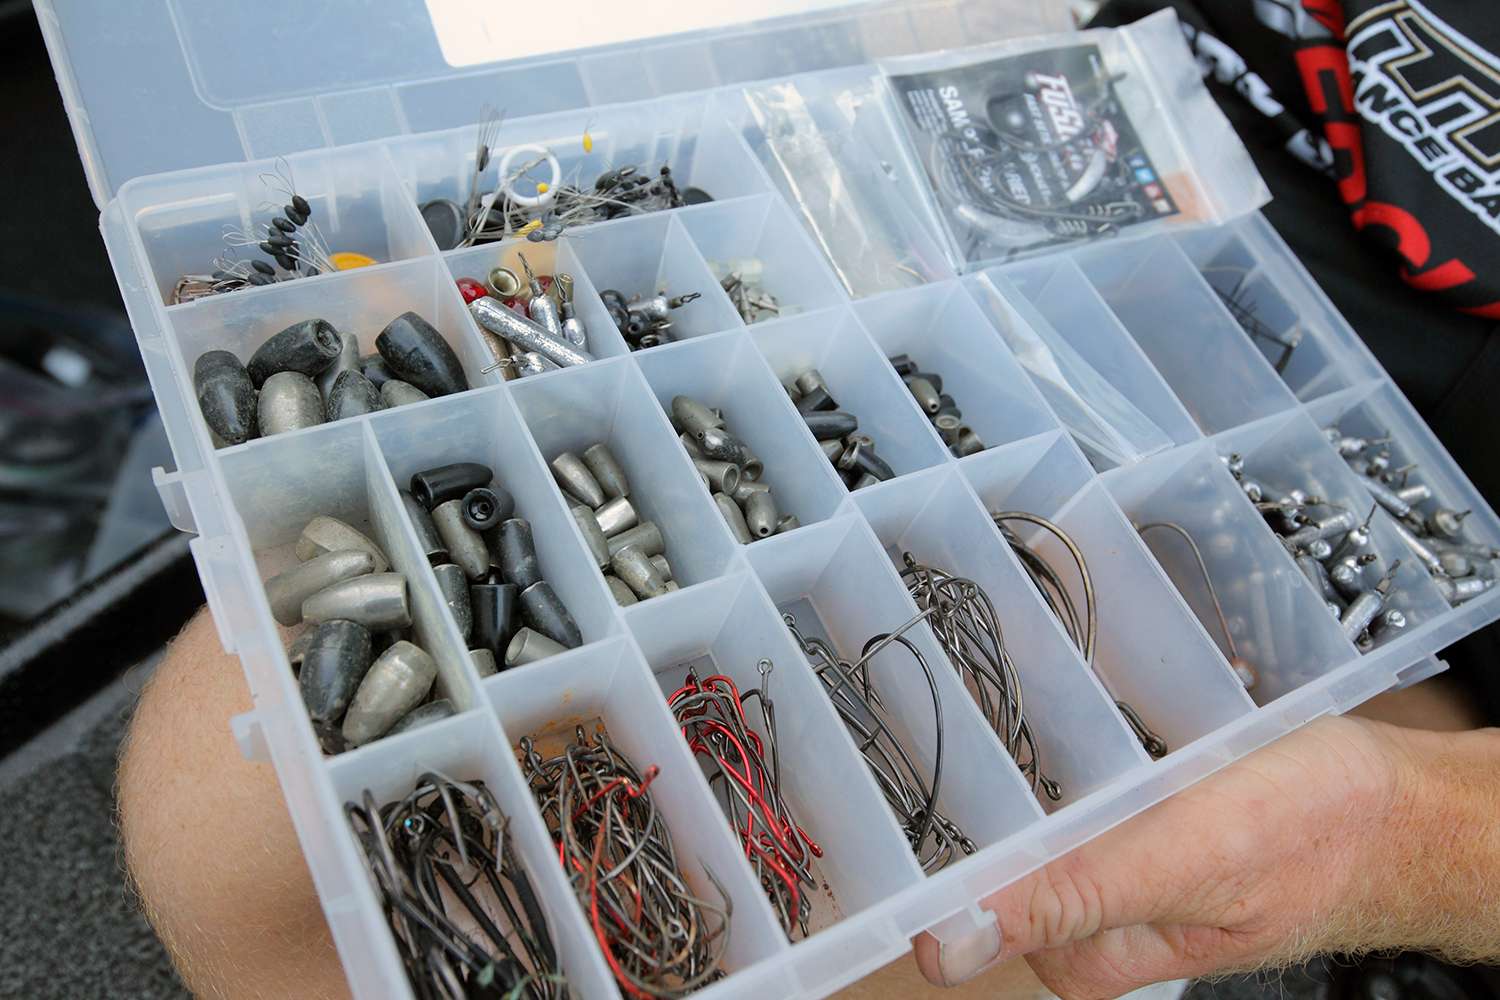 This box holds an organized selection of sinkers and hooks. This box was kept in the front boat compartment because it provided easy access as it's the closest one to Bertrand when he's fishing.